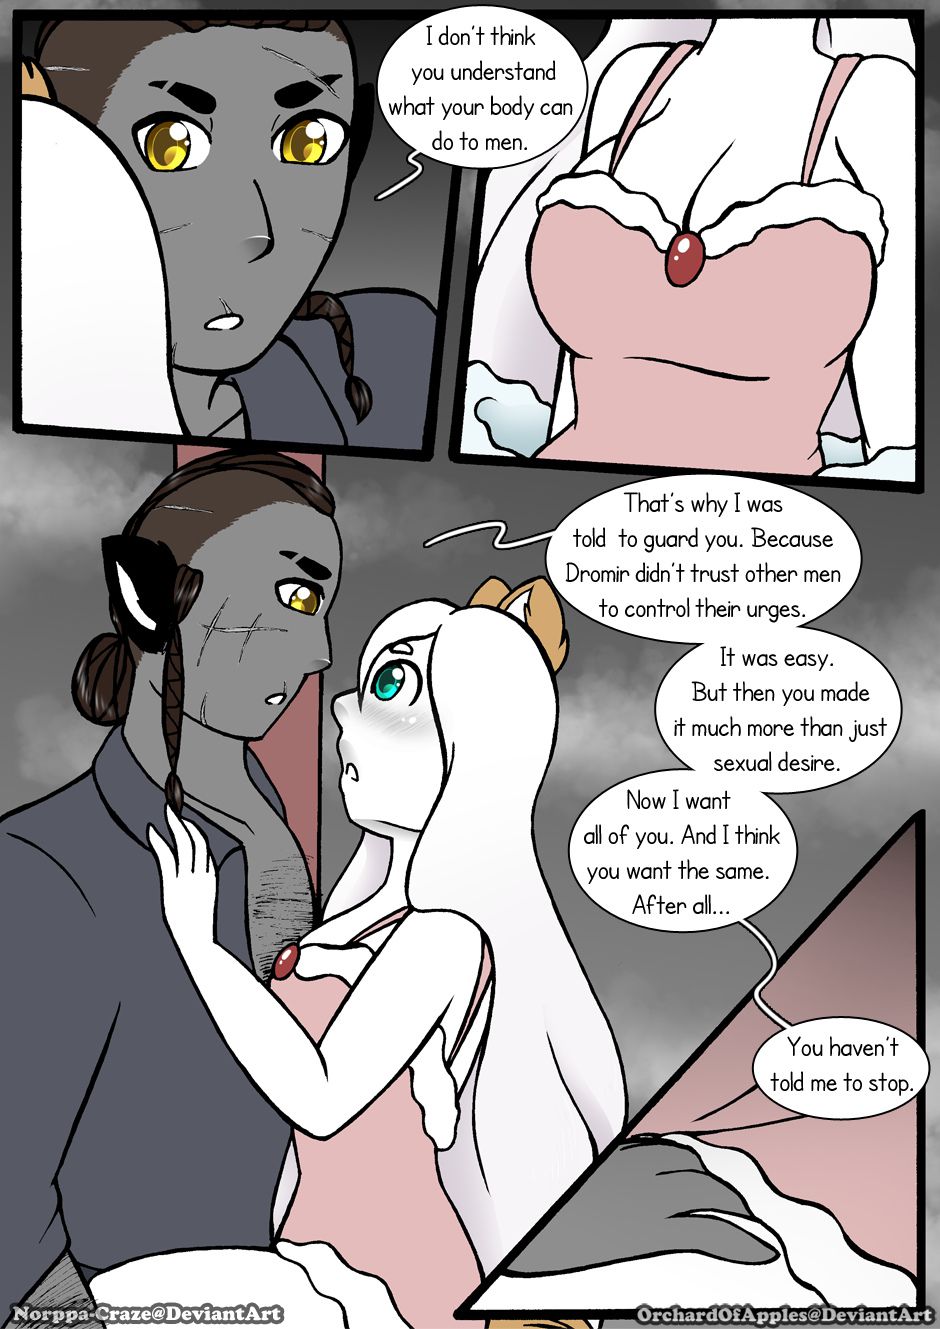 [Jeny-jen94] Between Kings and Queens [Ongoing] 347